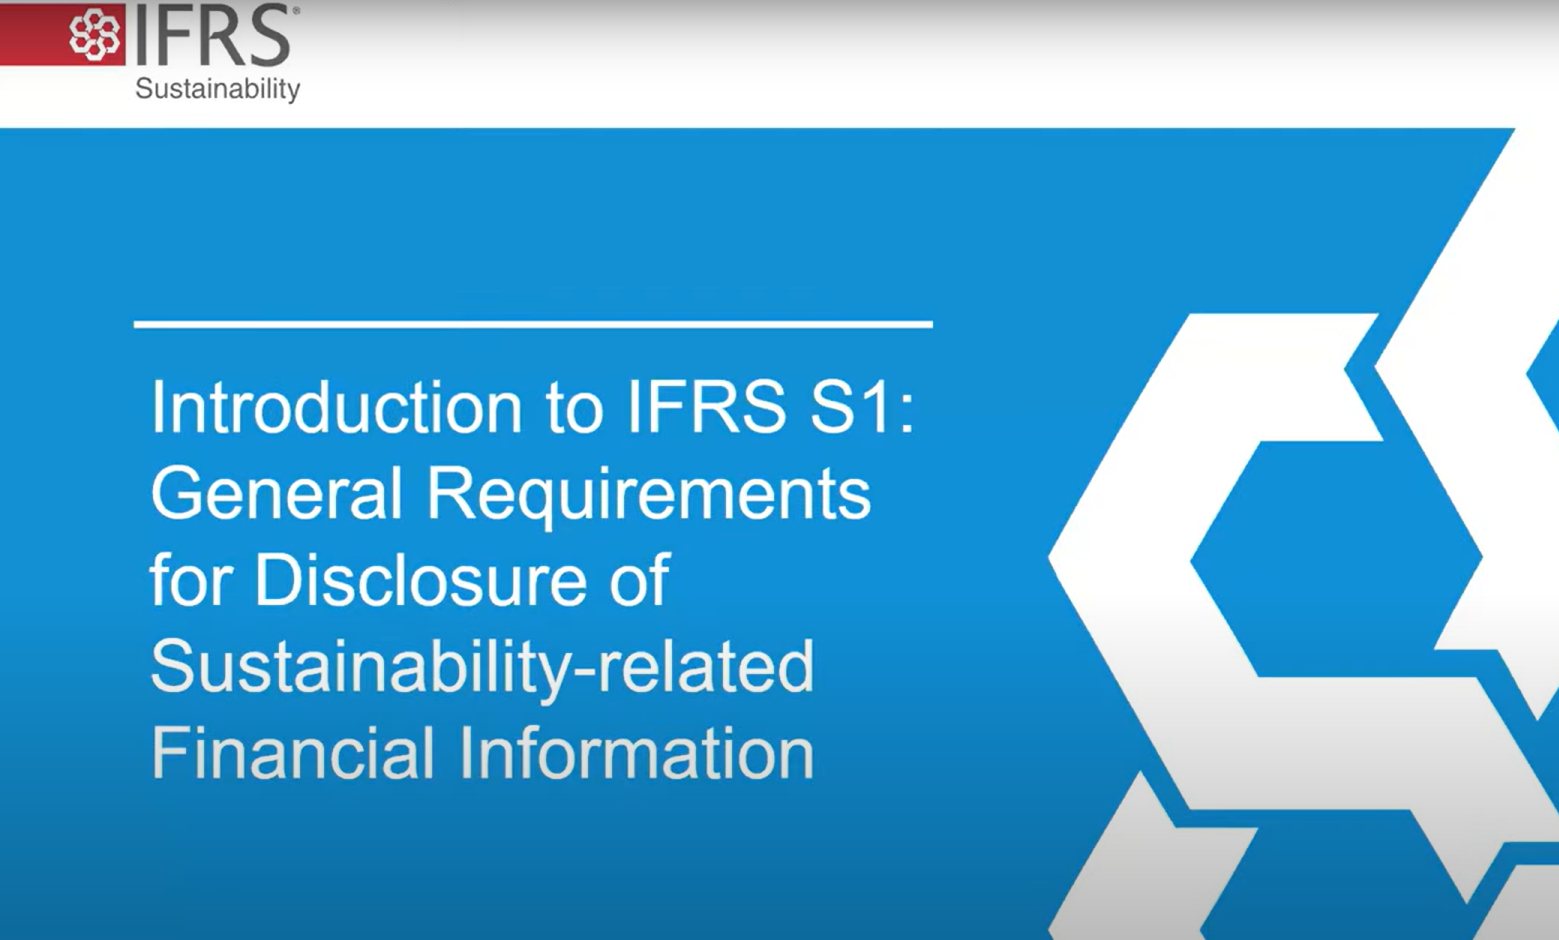 ​[ESG 공시] An In-depth Explainer with the ISSB on IFRS S1